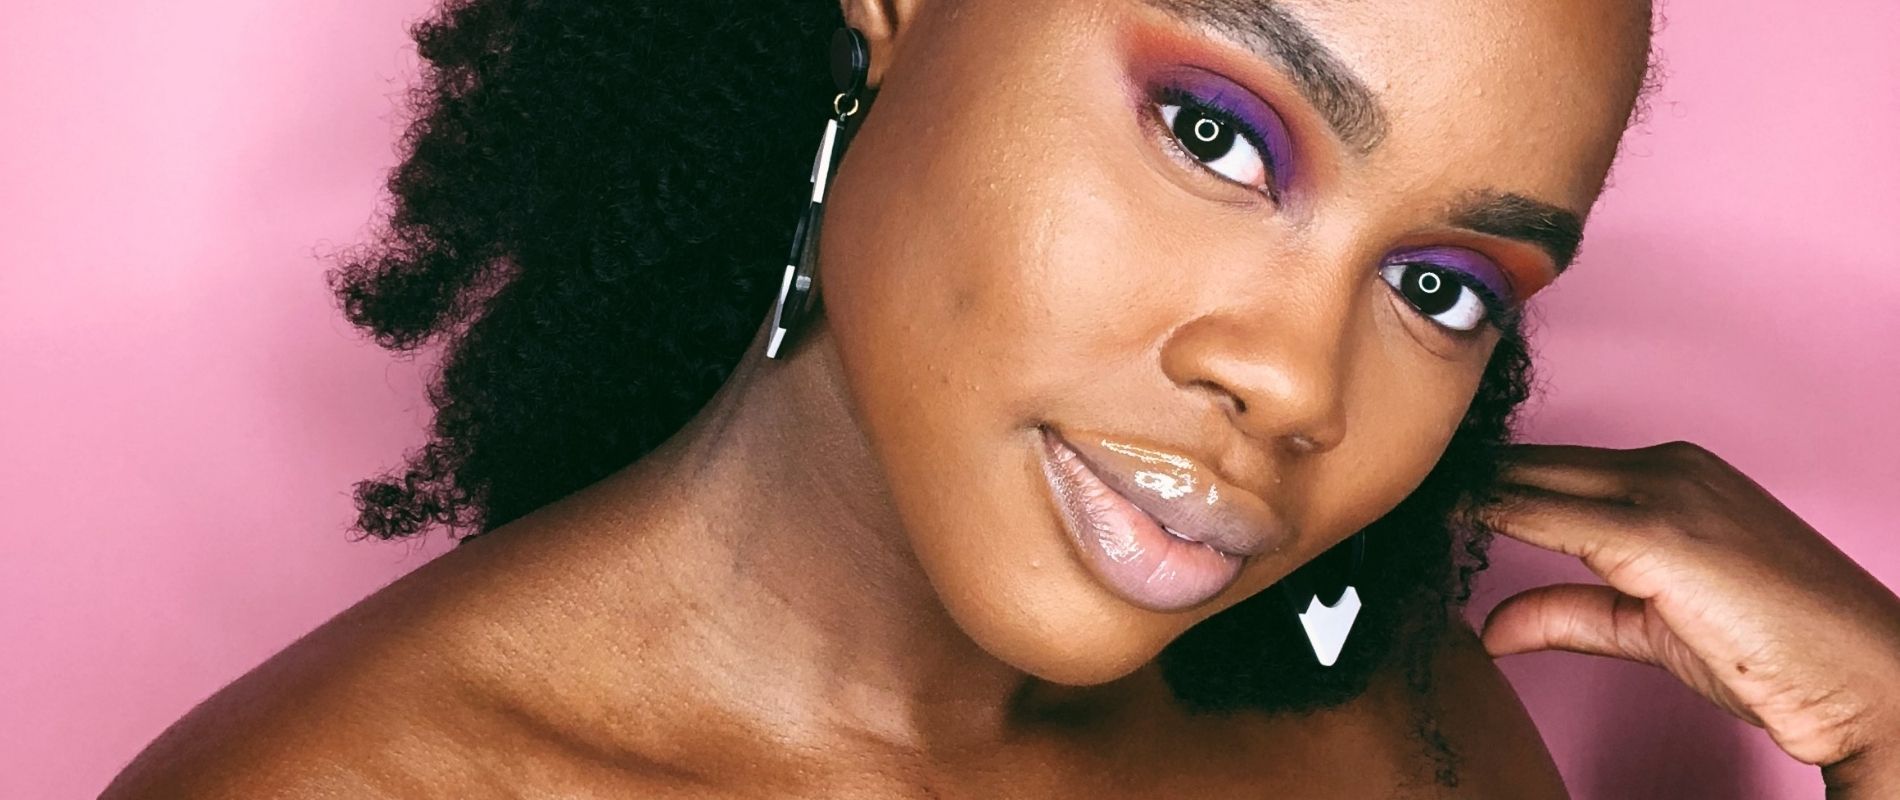 6 Reasons Why The LOC Method for Moisture Didn’t Work For You